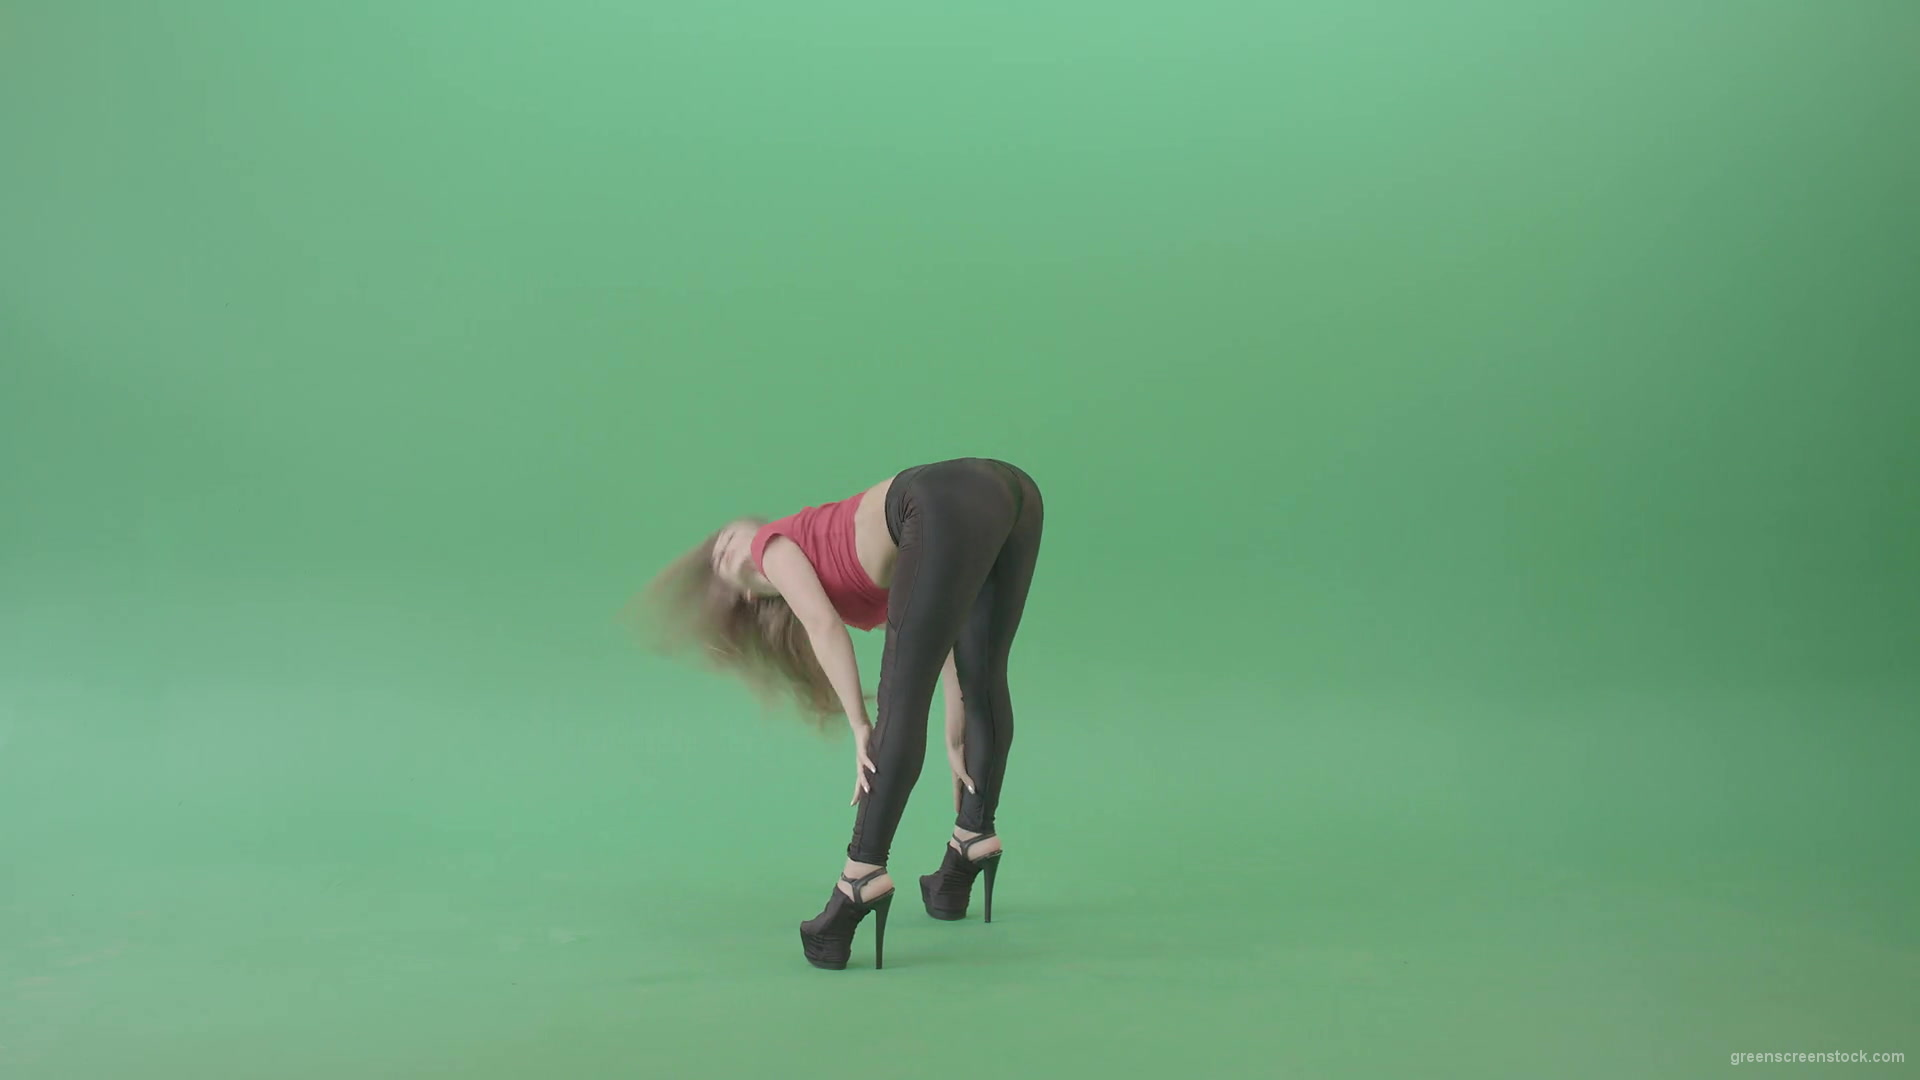 Sexy-posing-girl-showing-buts-and-dancing-on-green-screen-4K-Video-Footage-1920_008 Green Screen Stock